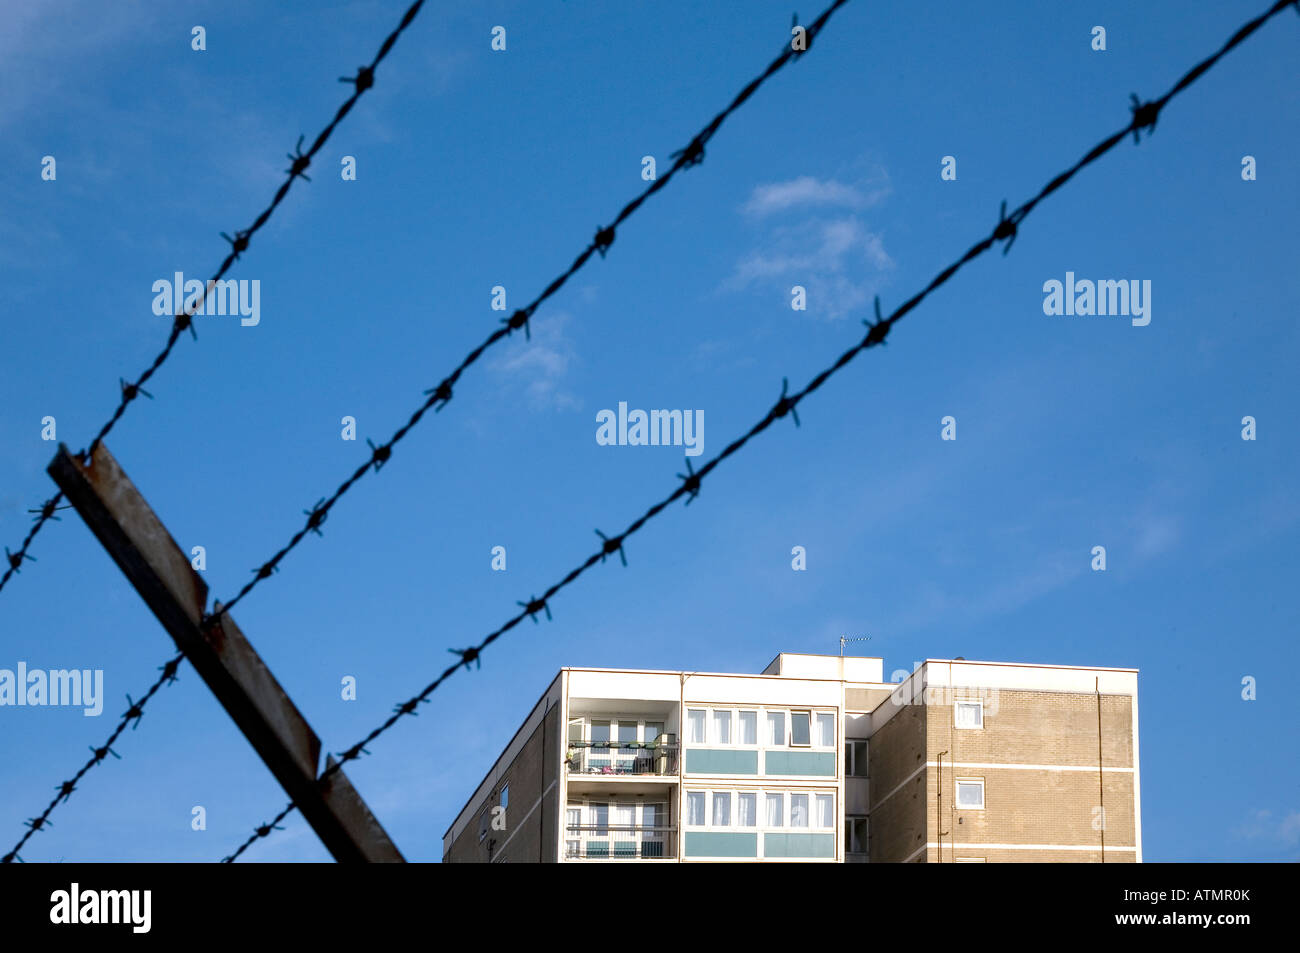 London tower blocks with barbed wire Stock Photo